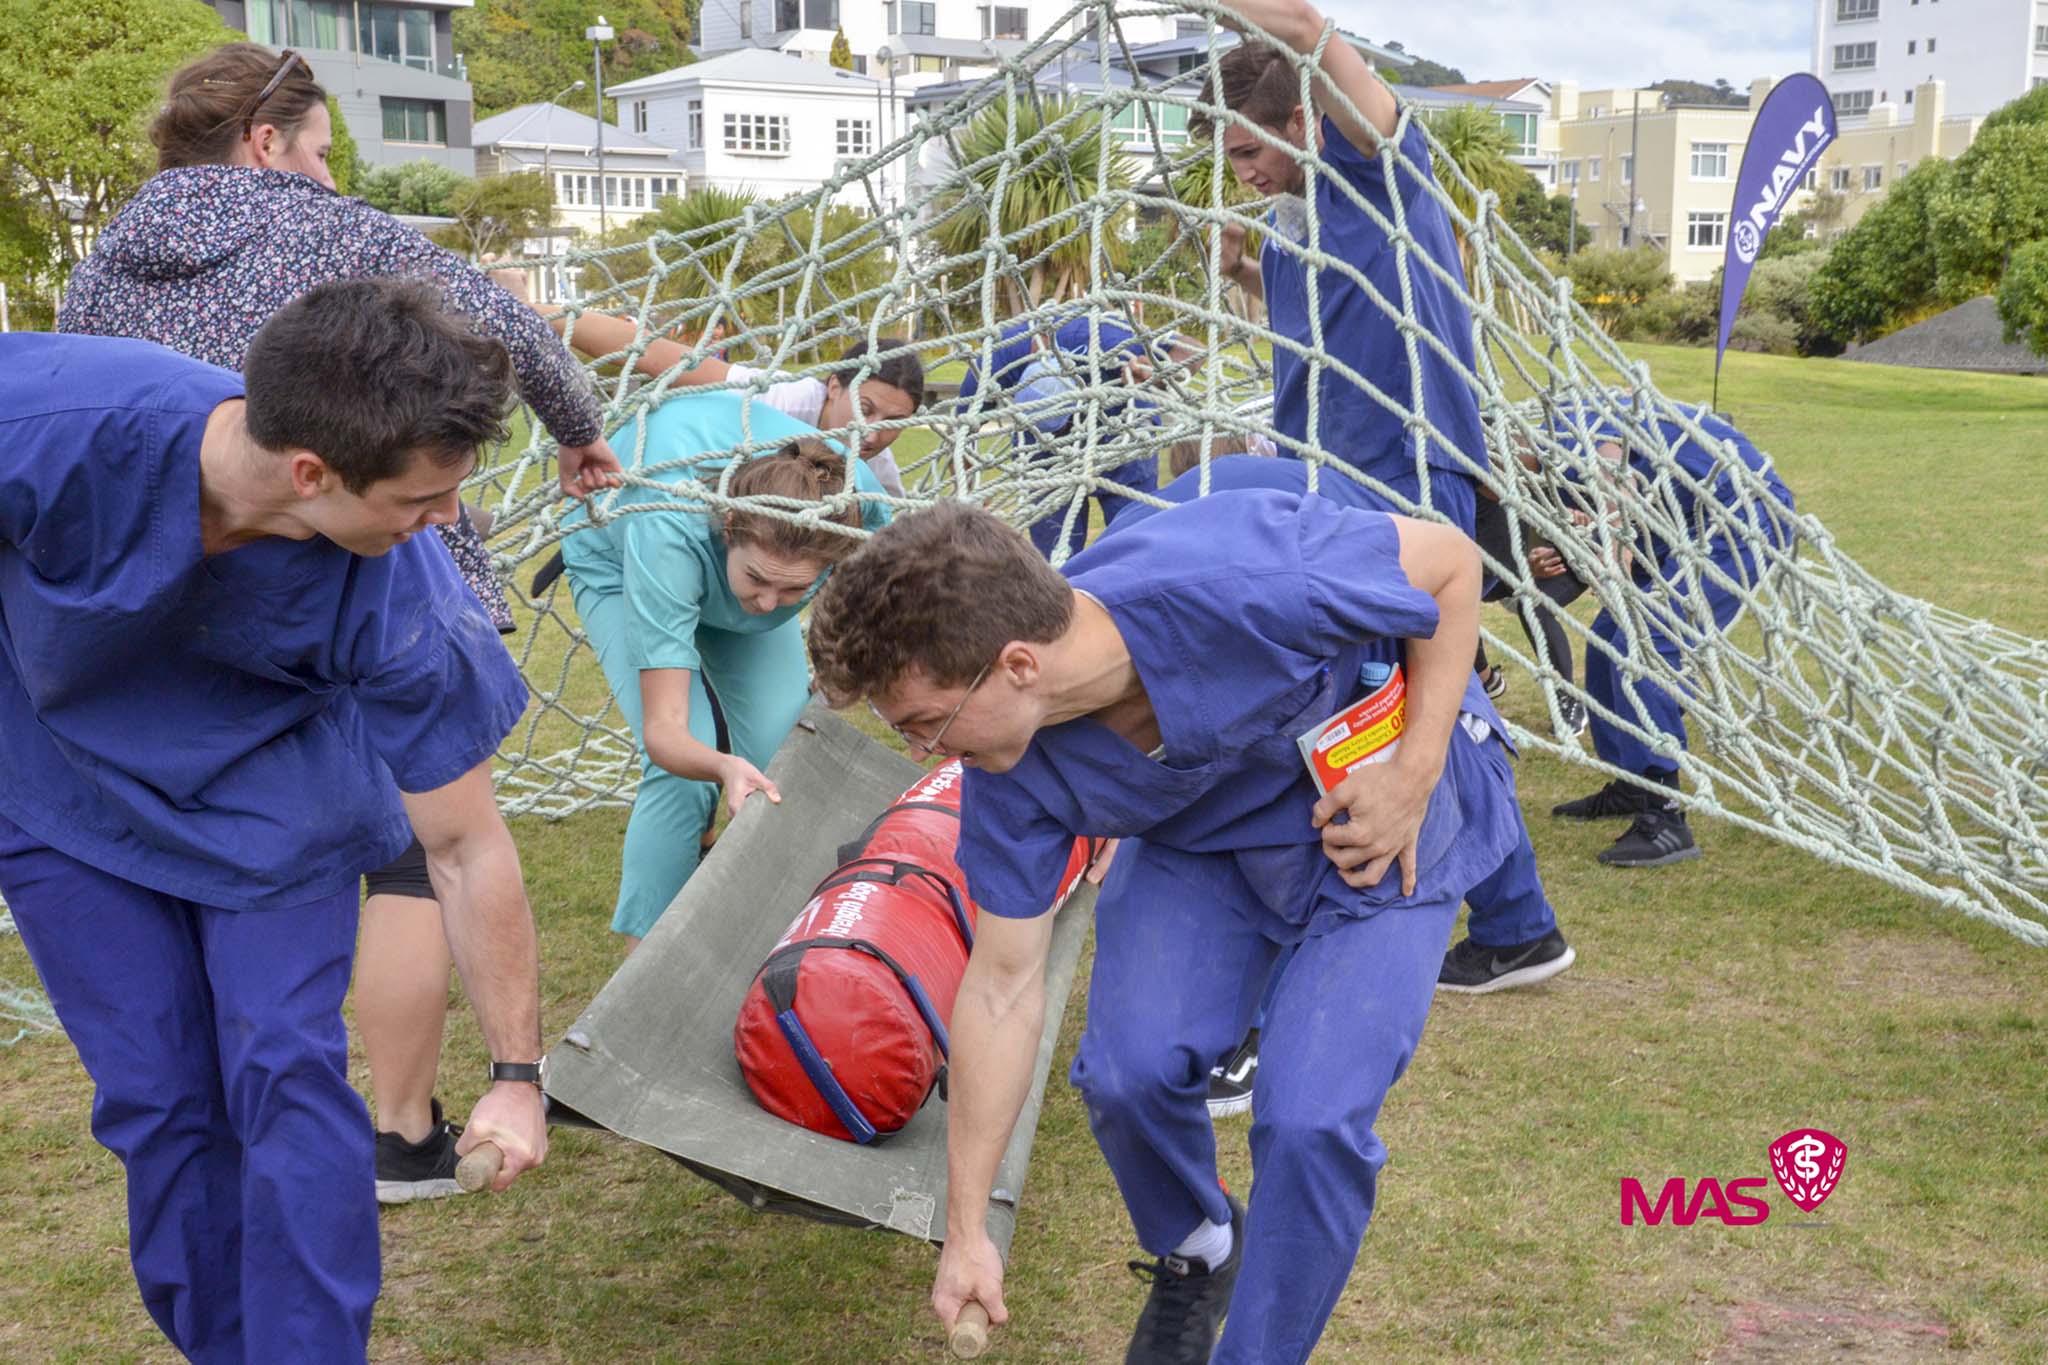 NZ Medical students teams outdoors rescue cargo net